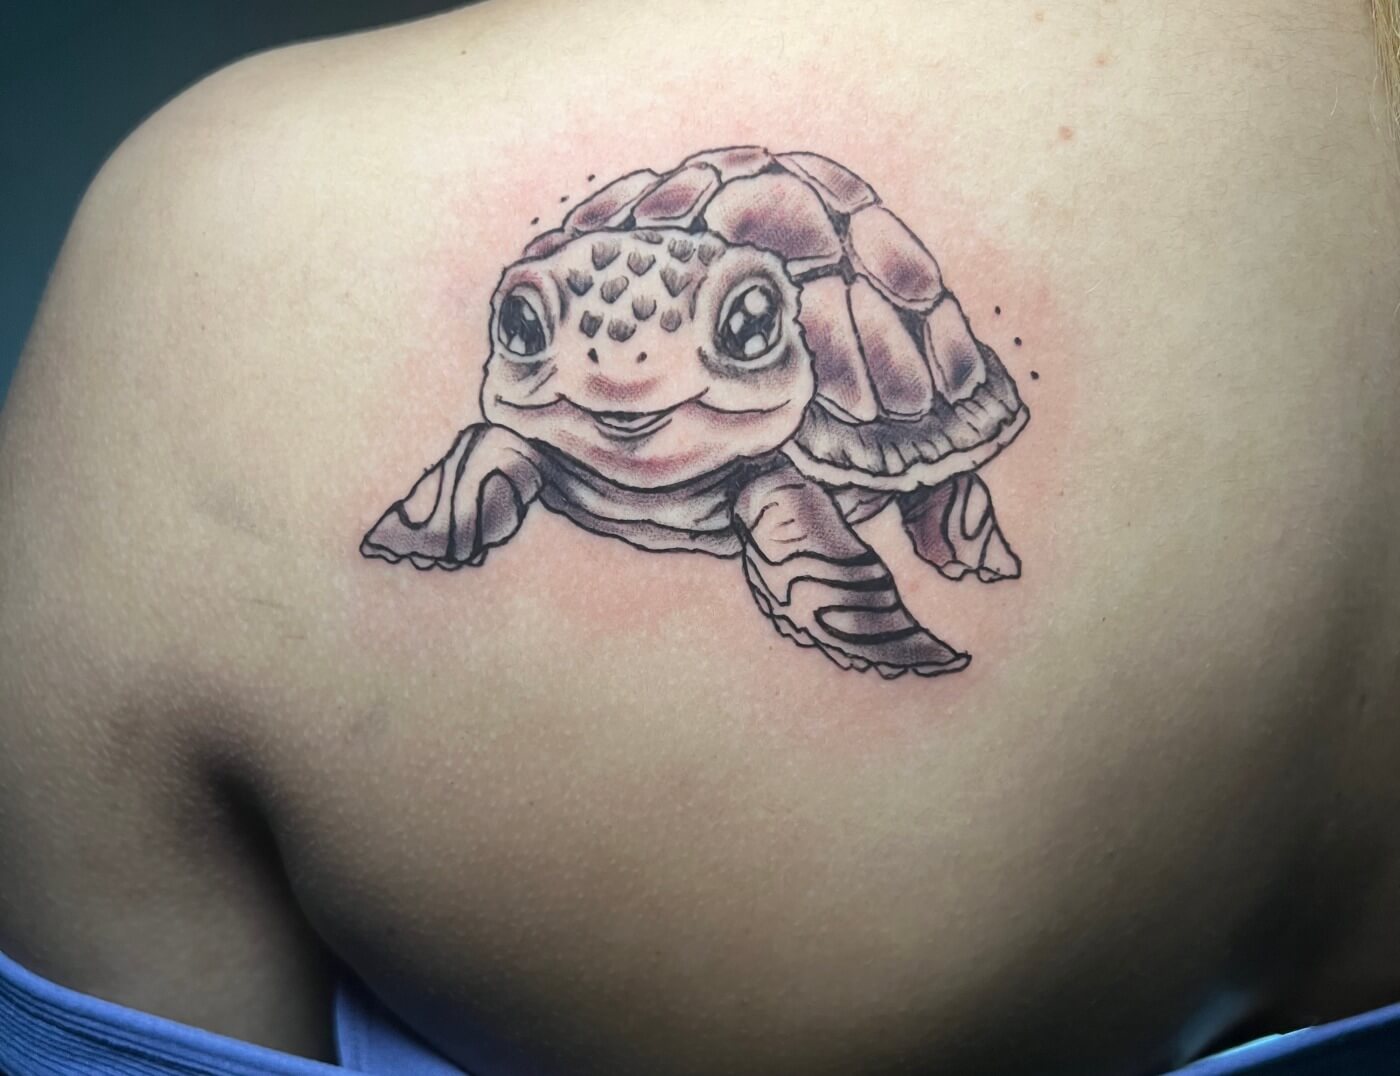 101 Best Turtle Tattoo Ideas You Have To See To Believe!